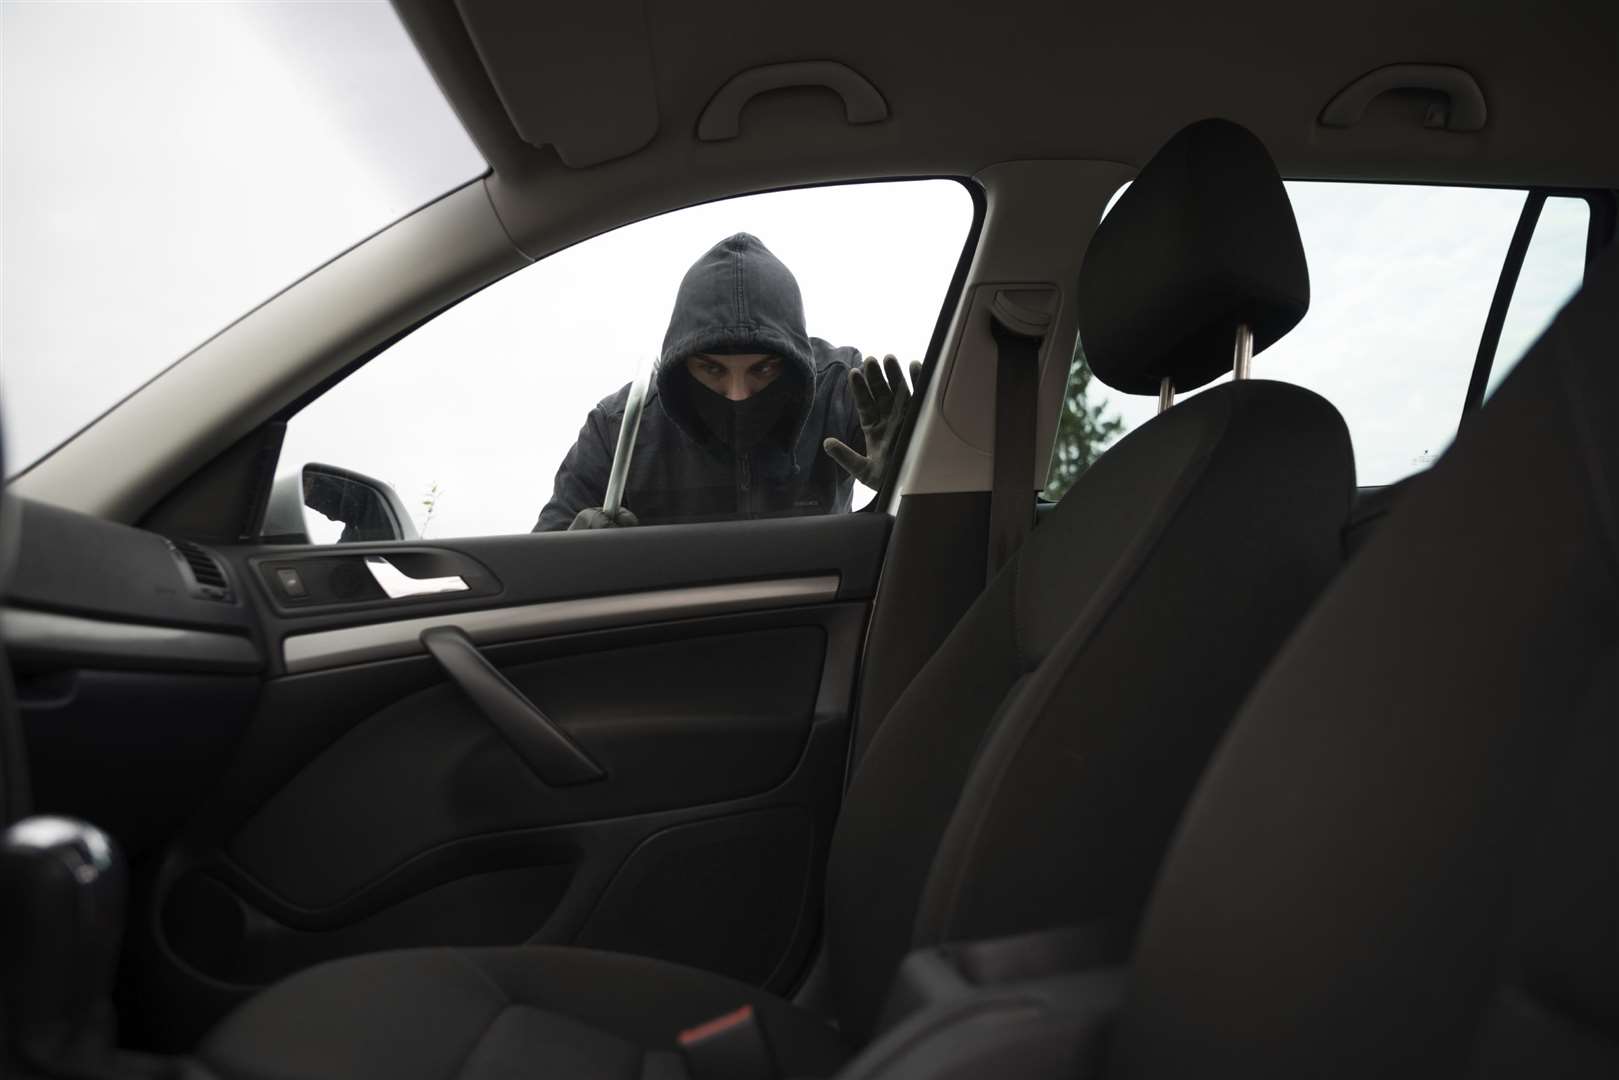 Officers now want residents to beware of vandals targetting cars. Stock image